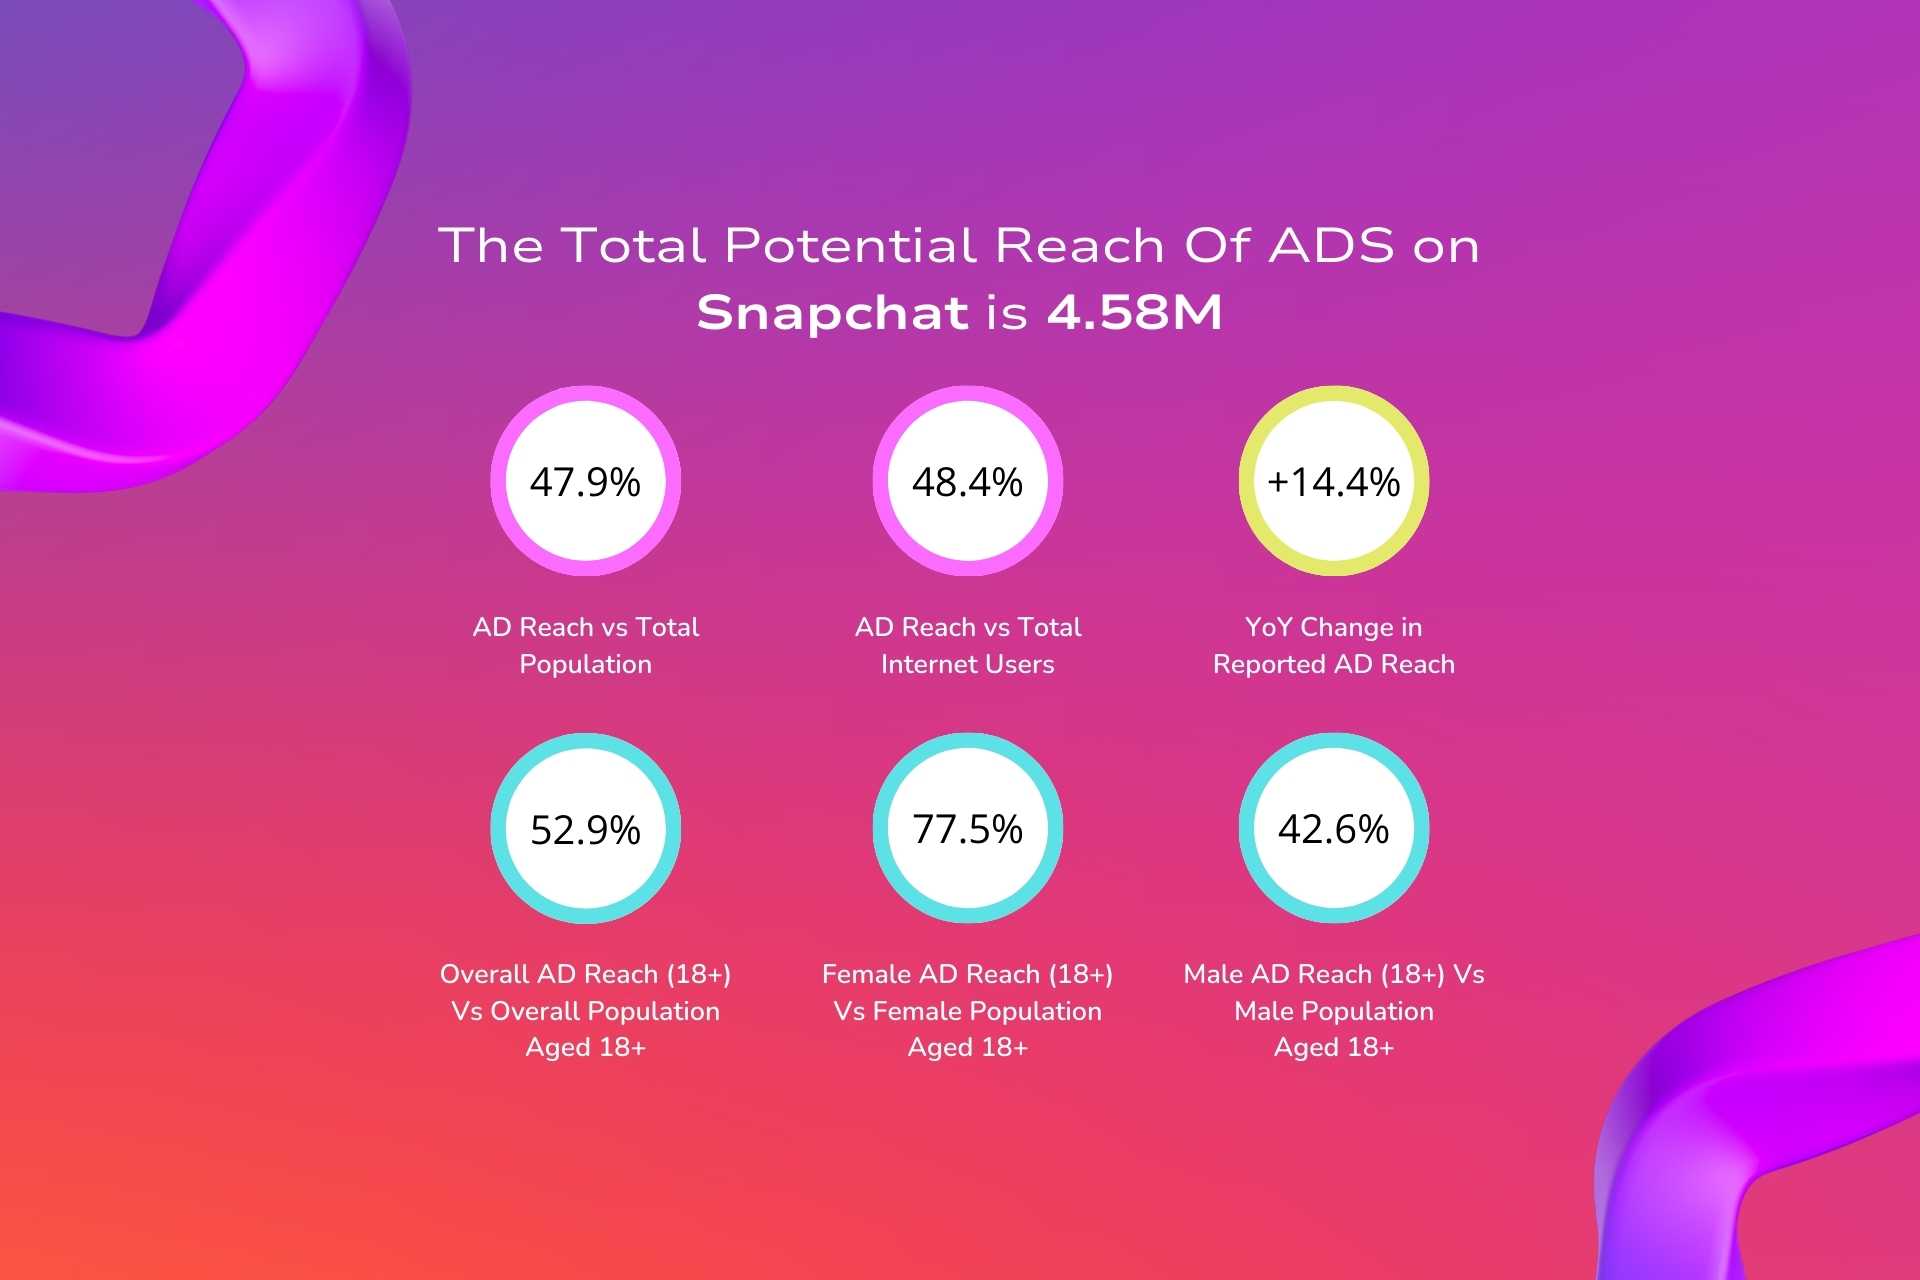 Growth of Social Media in the UAE -ADS on Snapchat